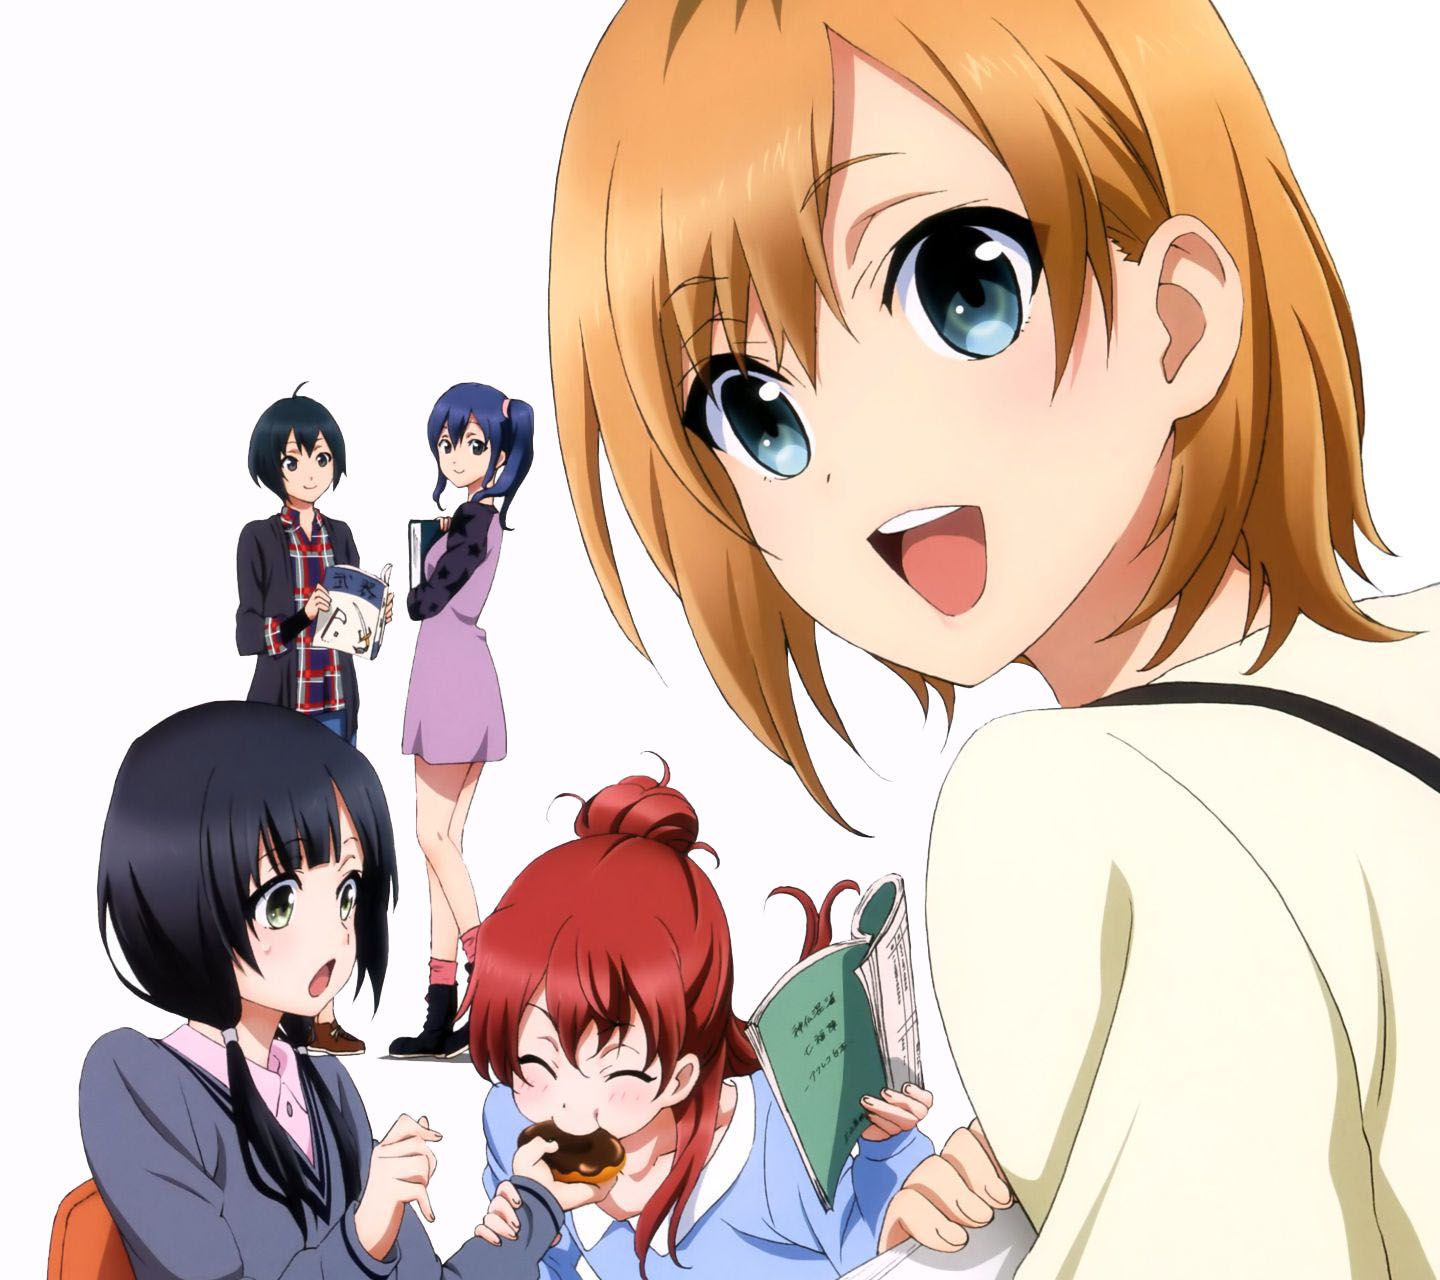 Shirobako Android壁紙 4 アニメ壁紙ネット Pc Android Iphone壁紙 画像